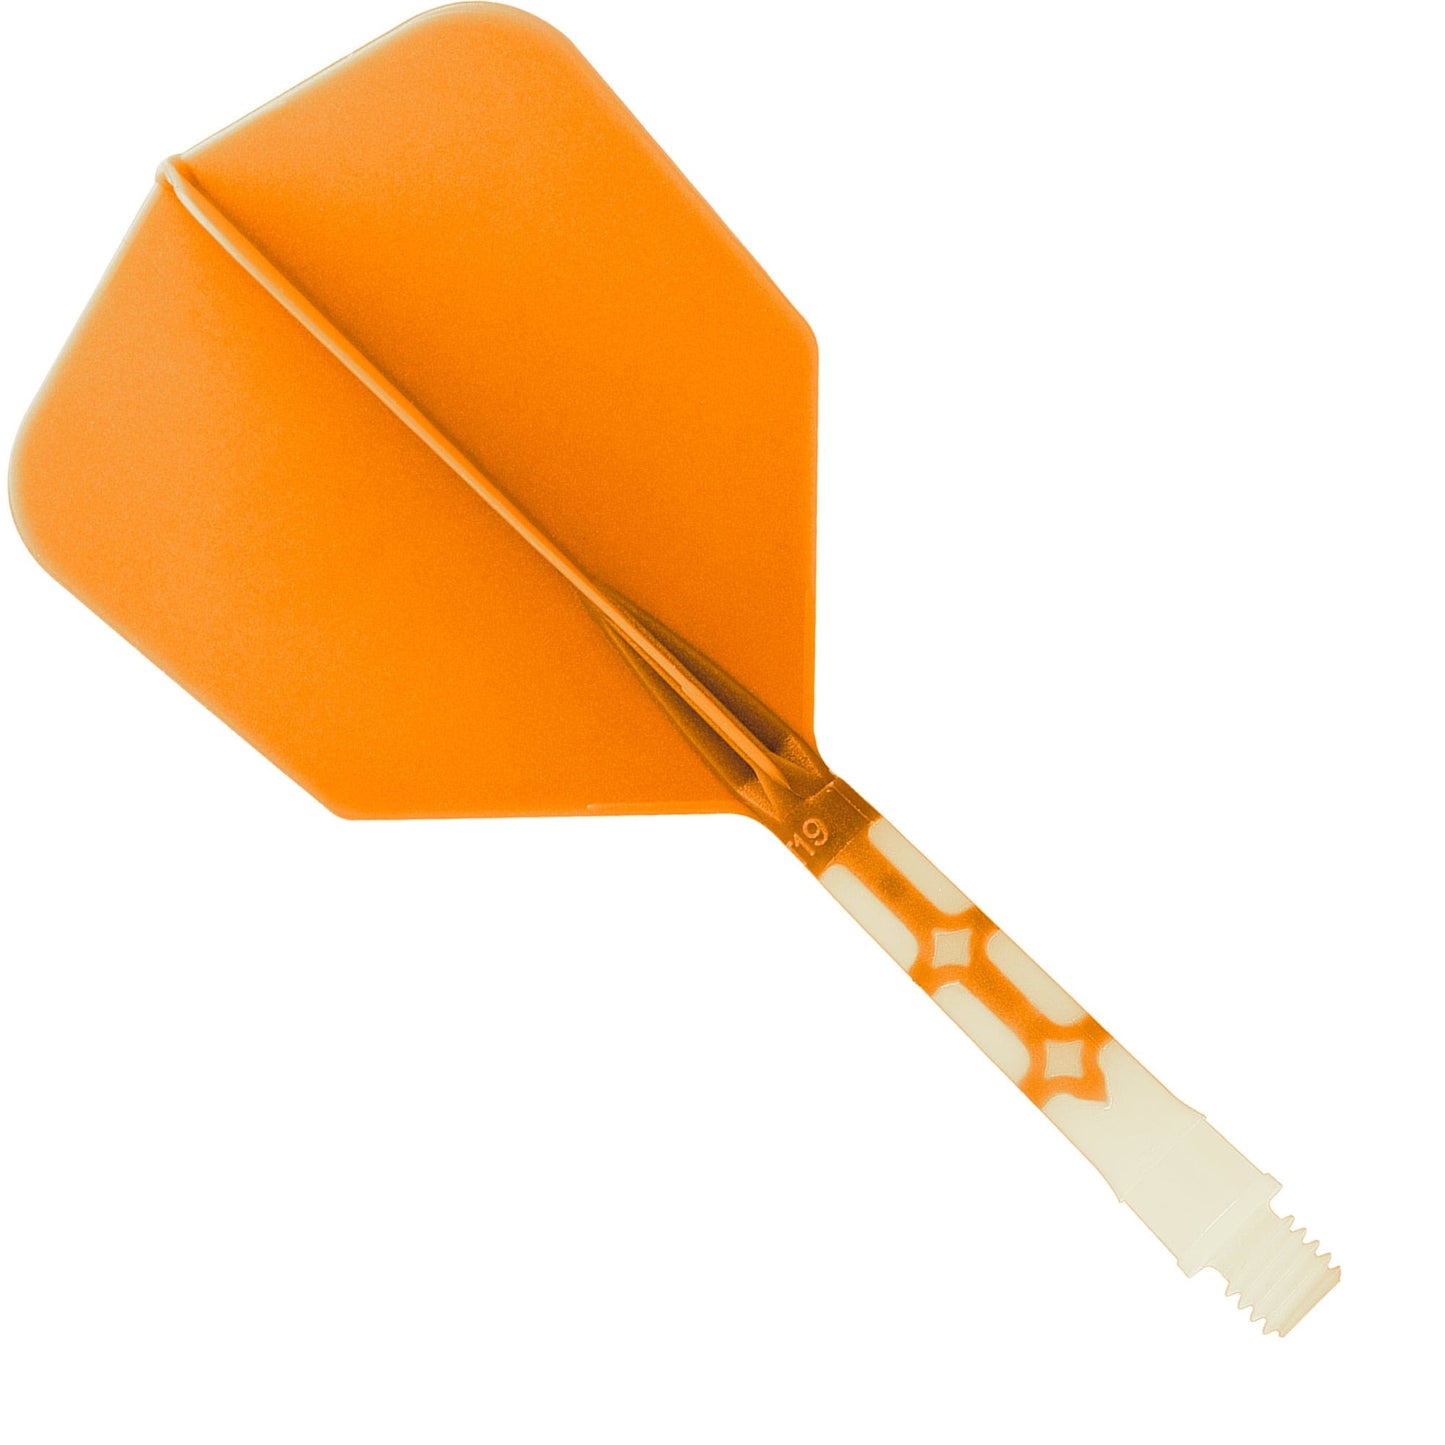 Cuesoul Rost T19 Integrated Dart Shaft and Flights - Big Wing - White with Orange Flight Medium